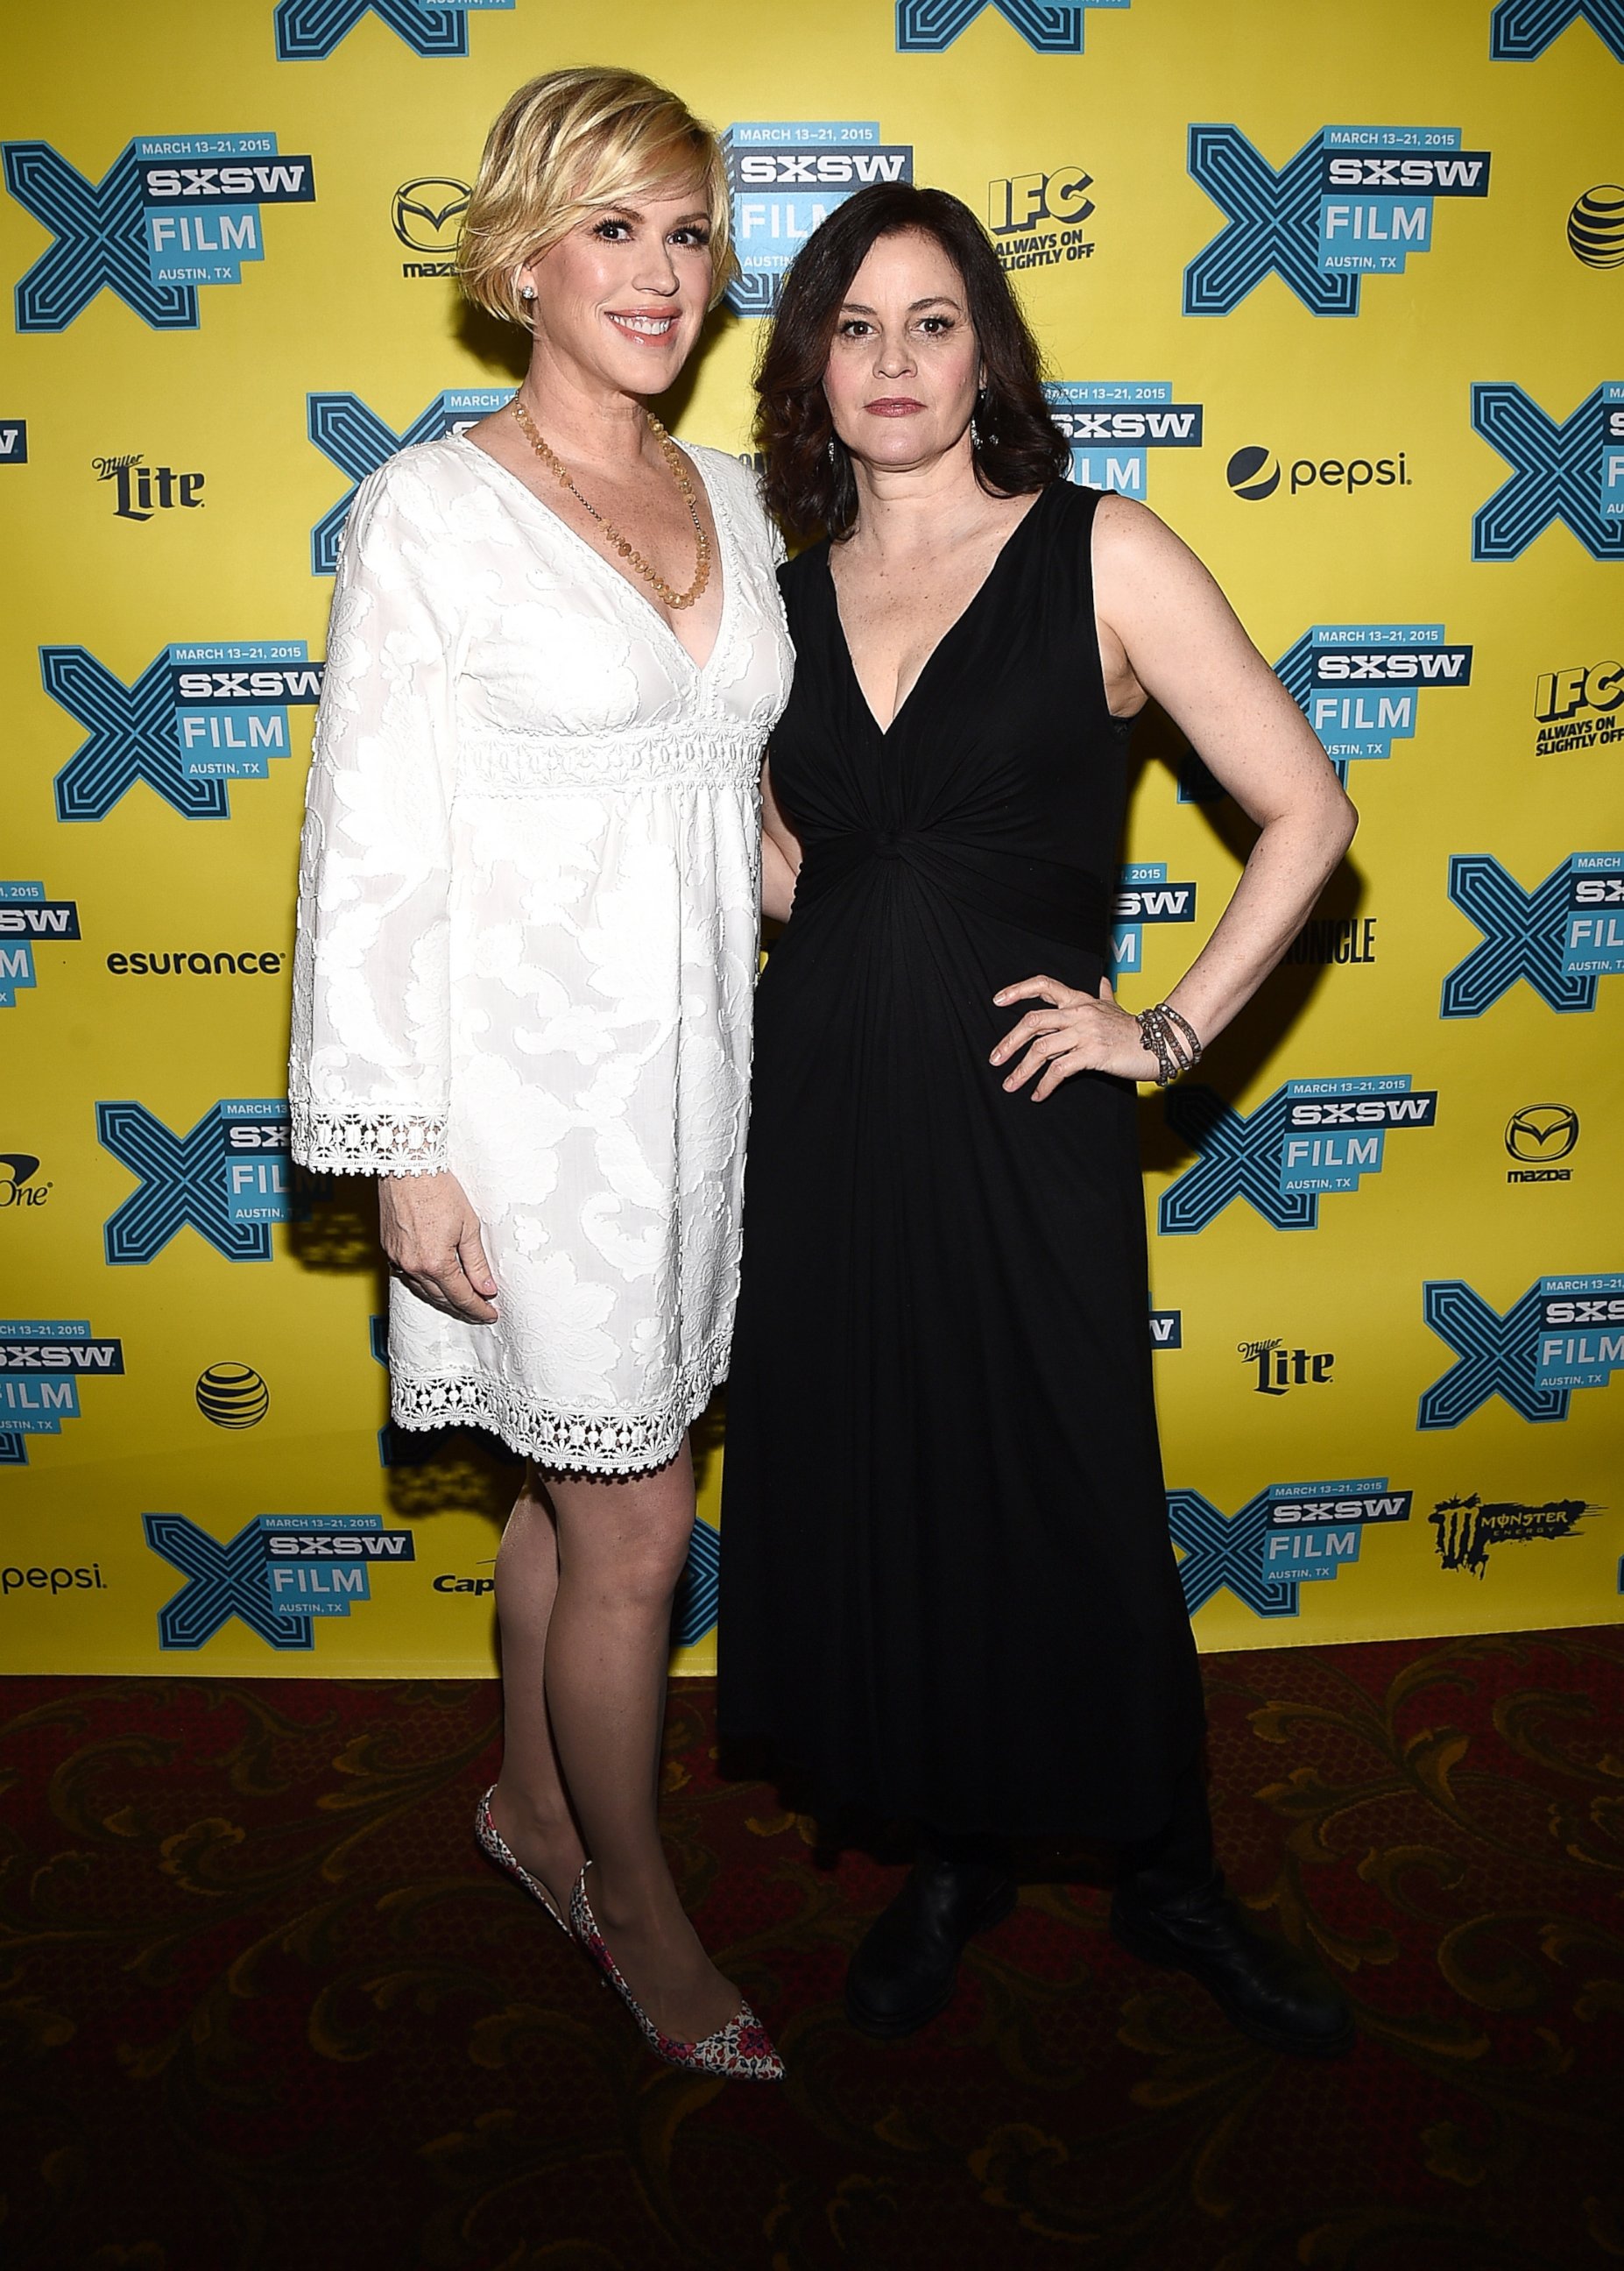 PHOTO: Actress Molly Ringwald and actress Ally Sheedy attend "The Breakfast Club" 30th Anniversary Restoration world premiere during the 2015 SXSW Music, Film + Interactive Festival at the Paramount Theatre, March 16, 2015, in Austin, Texas. 